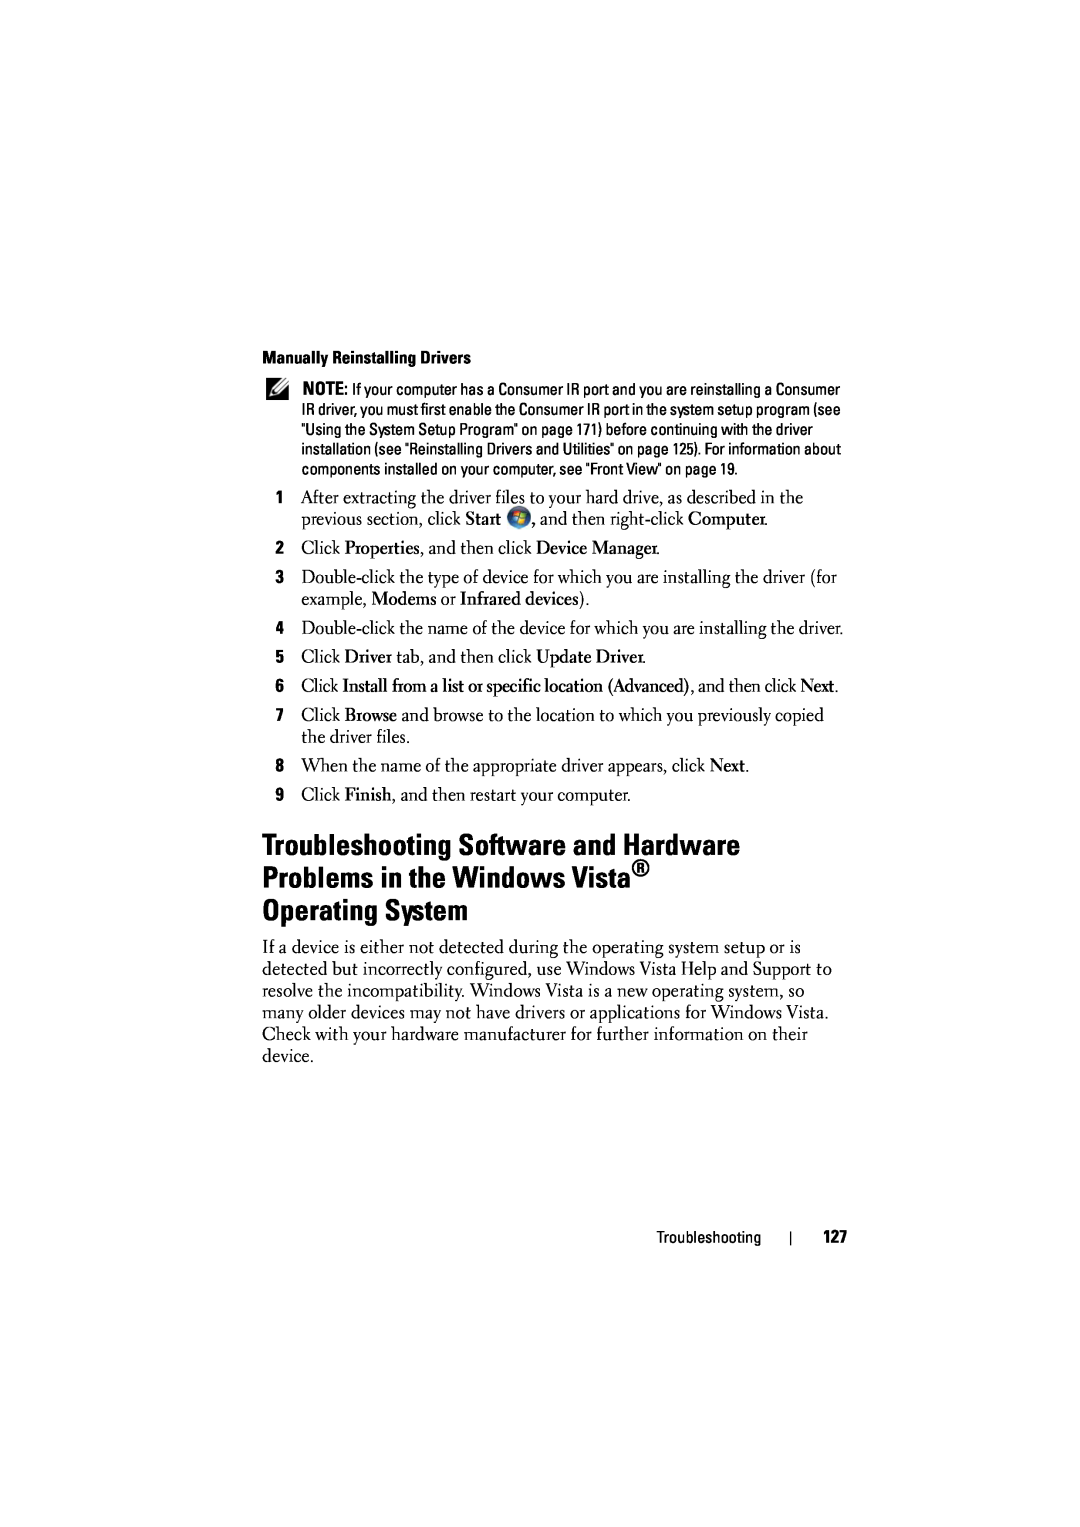 Dell 1526, 1525 owner manual Troubleshooting Software and Hardware Problems in the Windows Vista, Operating System 